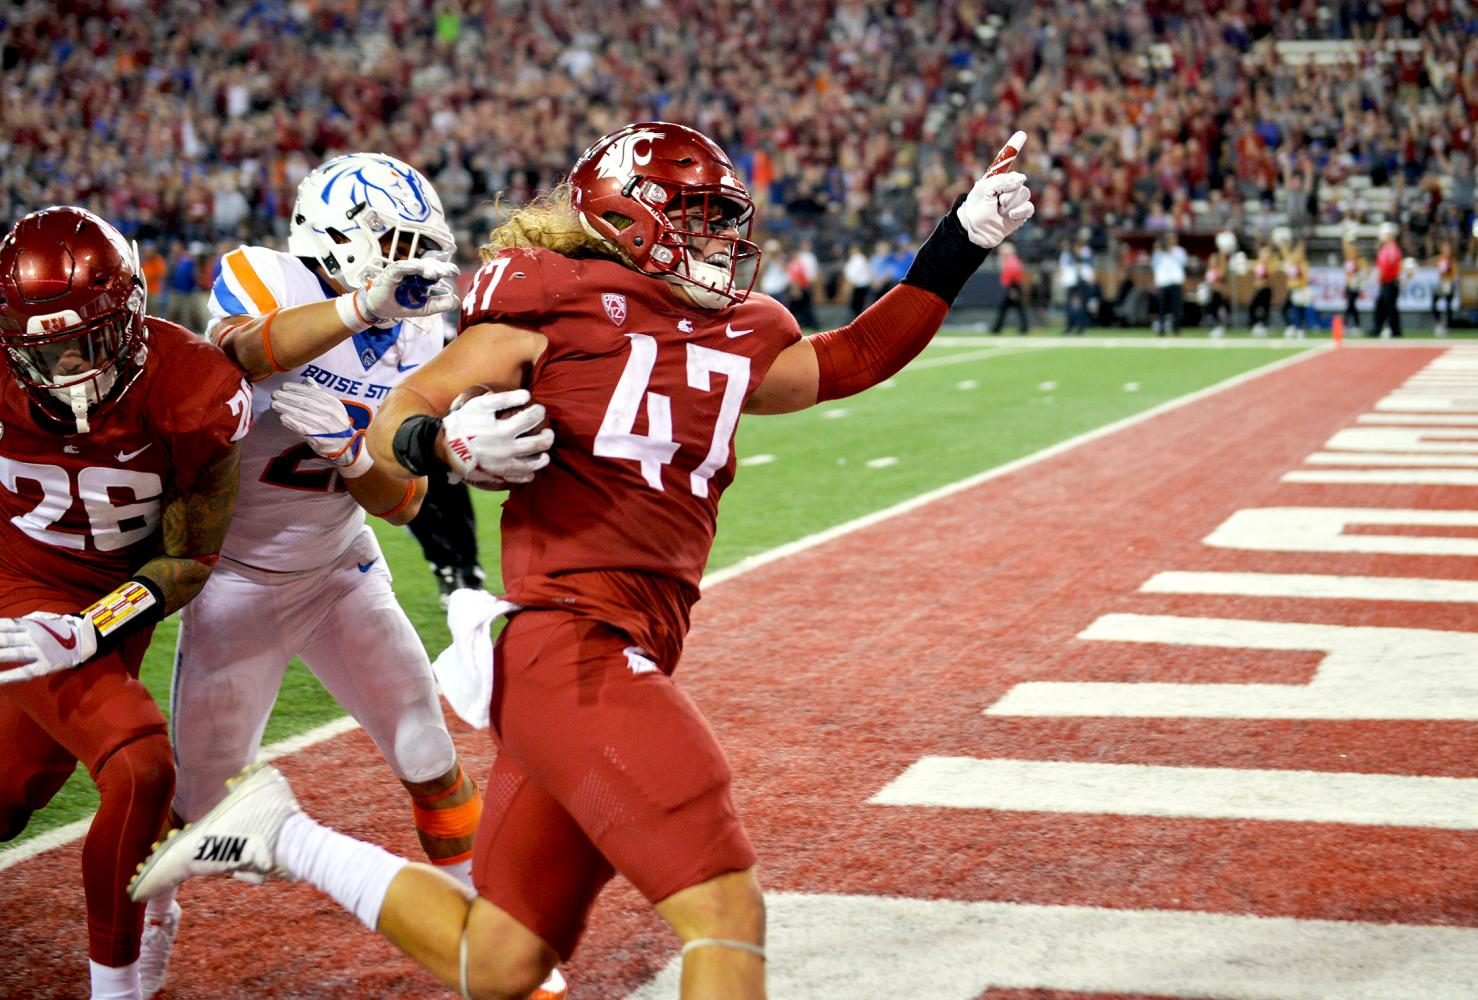 Then-redshirt senior linebacker Peyton Pelluer scores a touchdown against Boise State, bringing the Cougars within a touchdown of tying the game on Sept. 9, 2017.